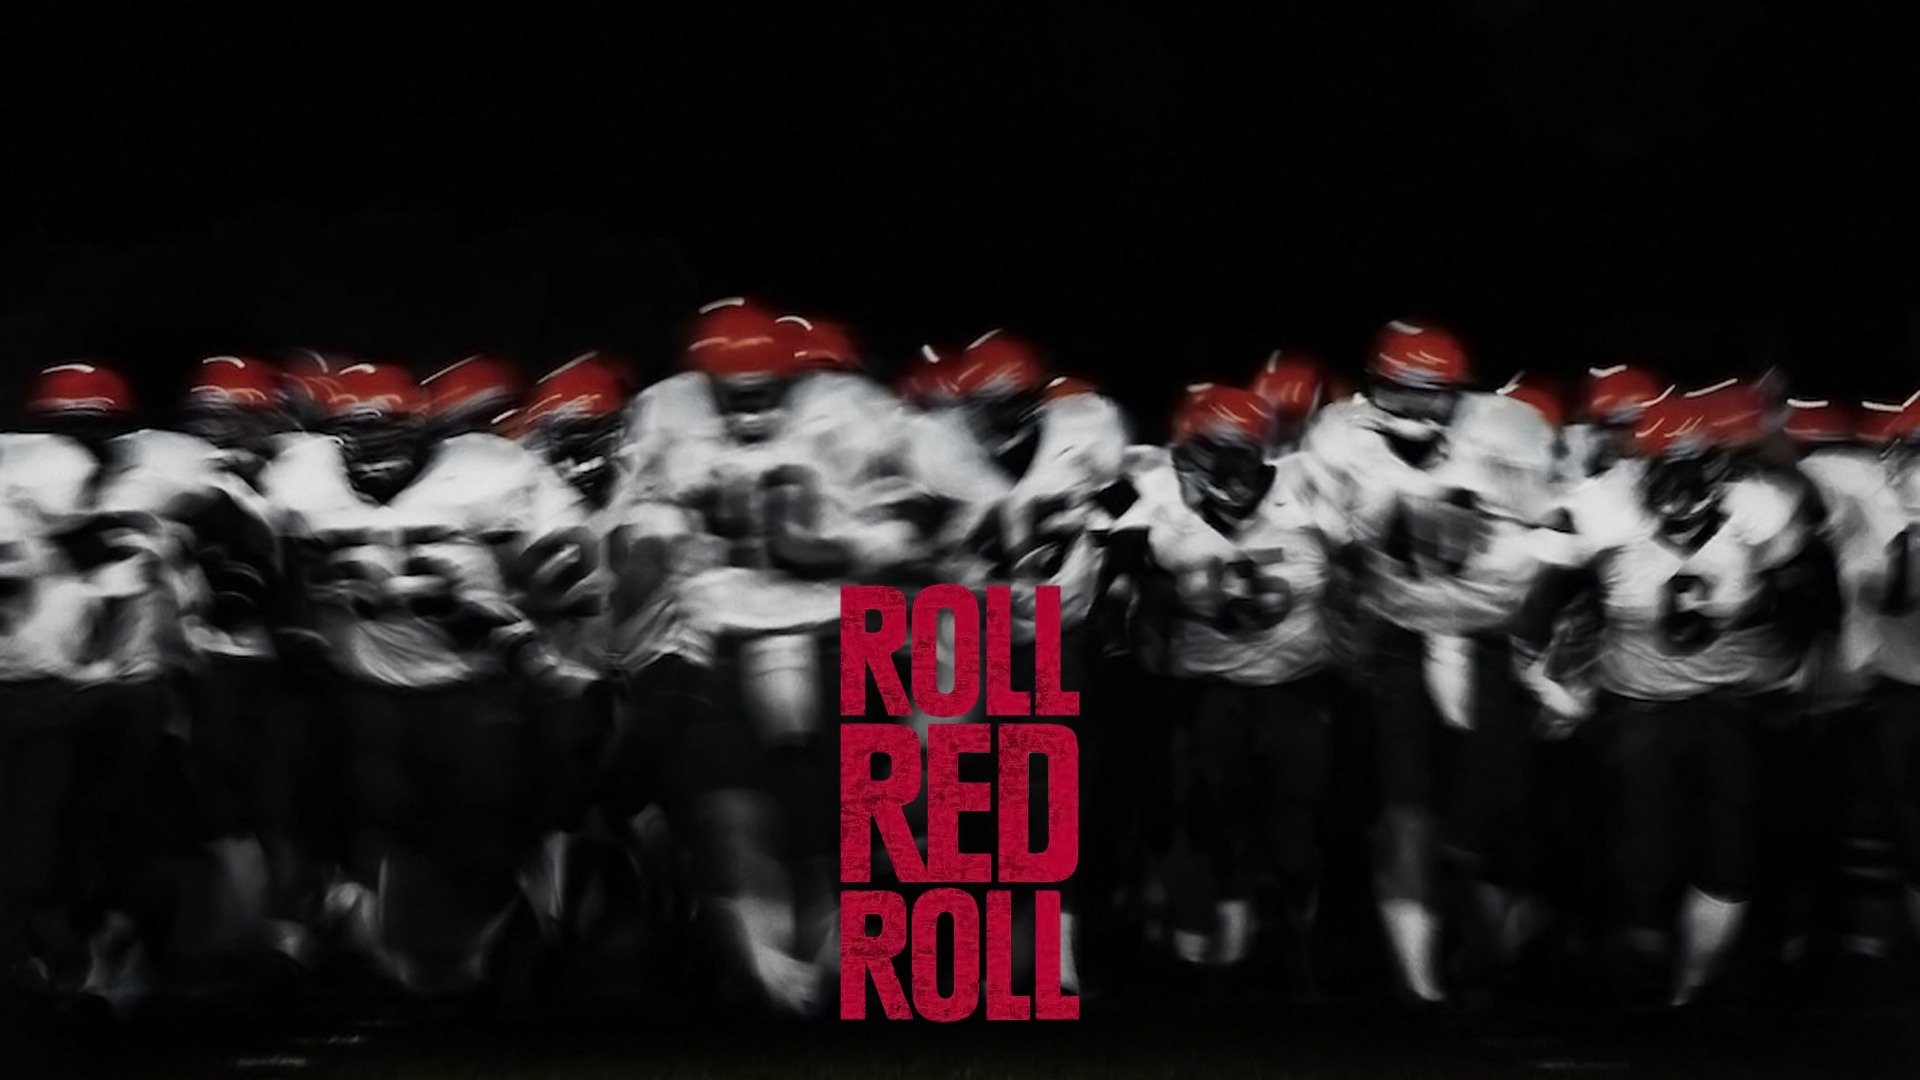 Red roll. Roll and Red.